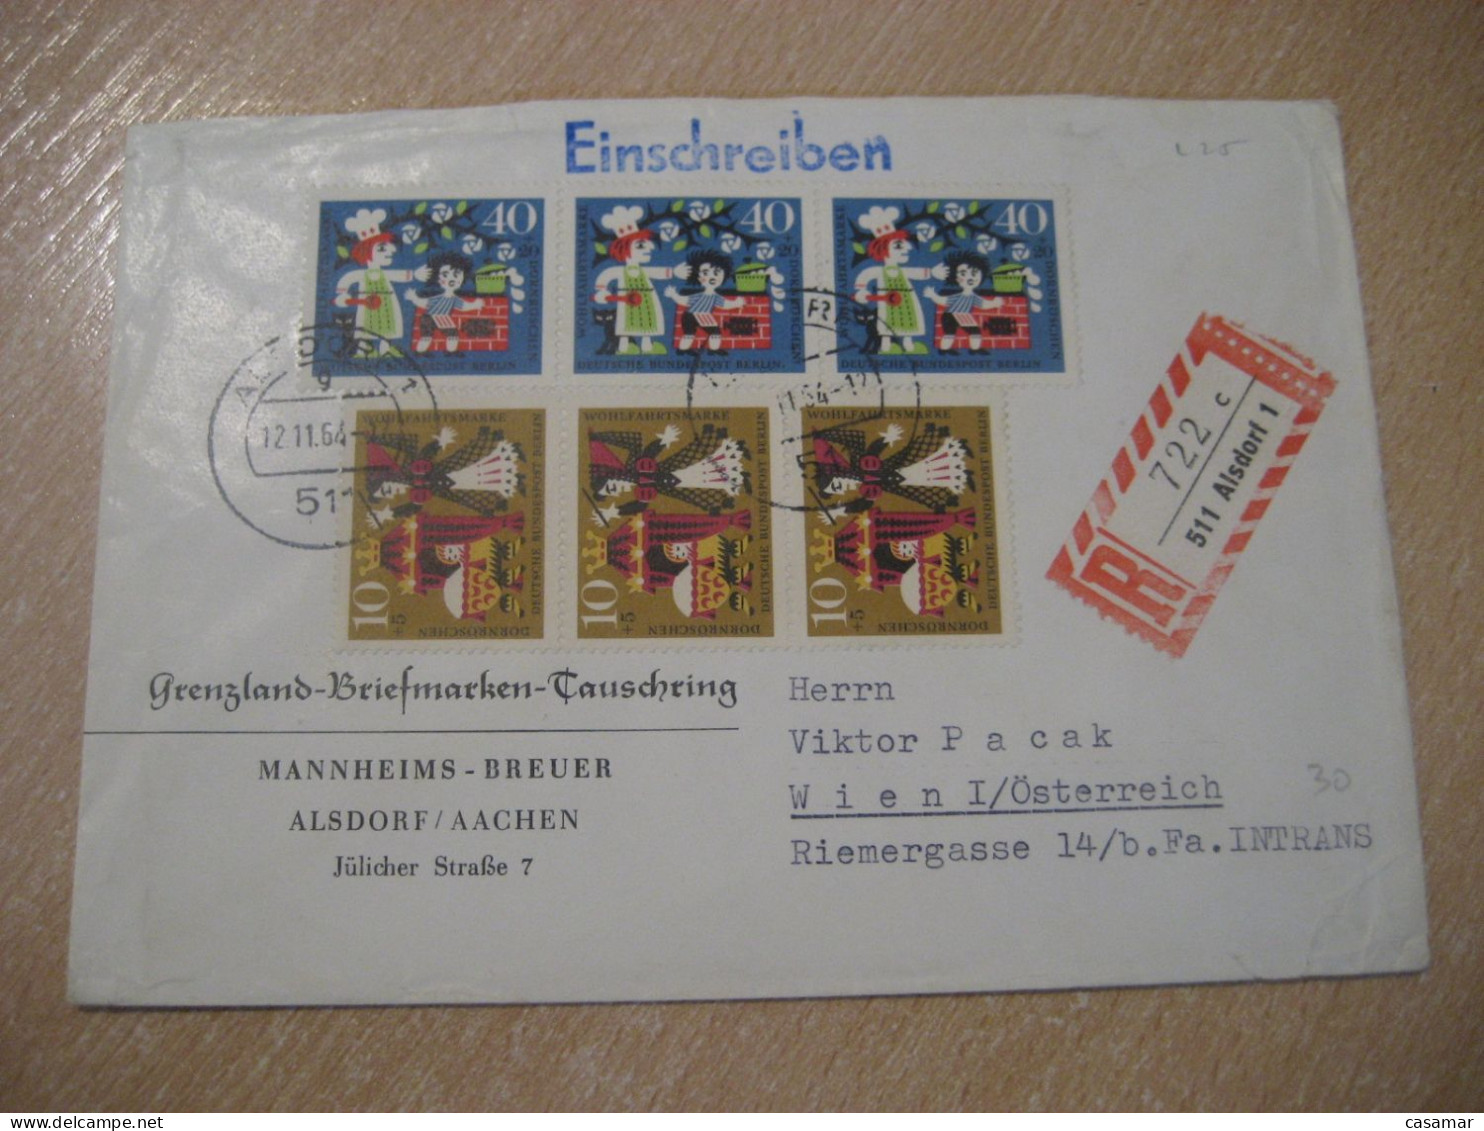 ALSDORF 1964 To Wien Austria Registered Cancel Cover GERMANY - Lettres & Documents